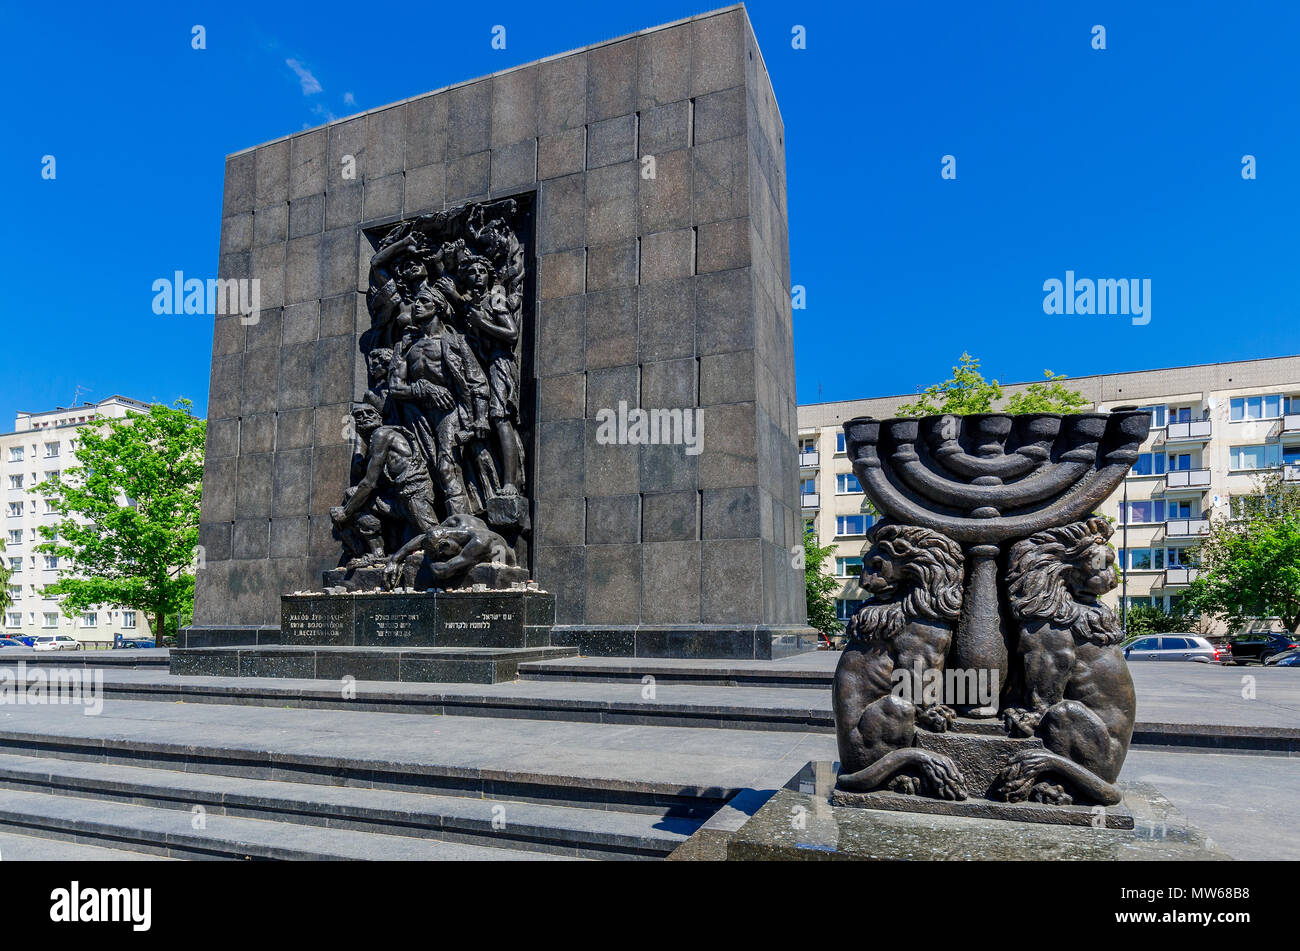 Warsaw, Poland. The Monument to the Ghetto Heroes, designed by Natan Rapaport. Stock Photo